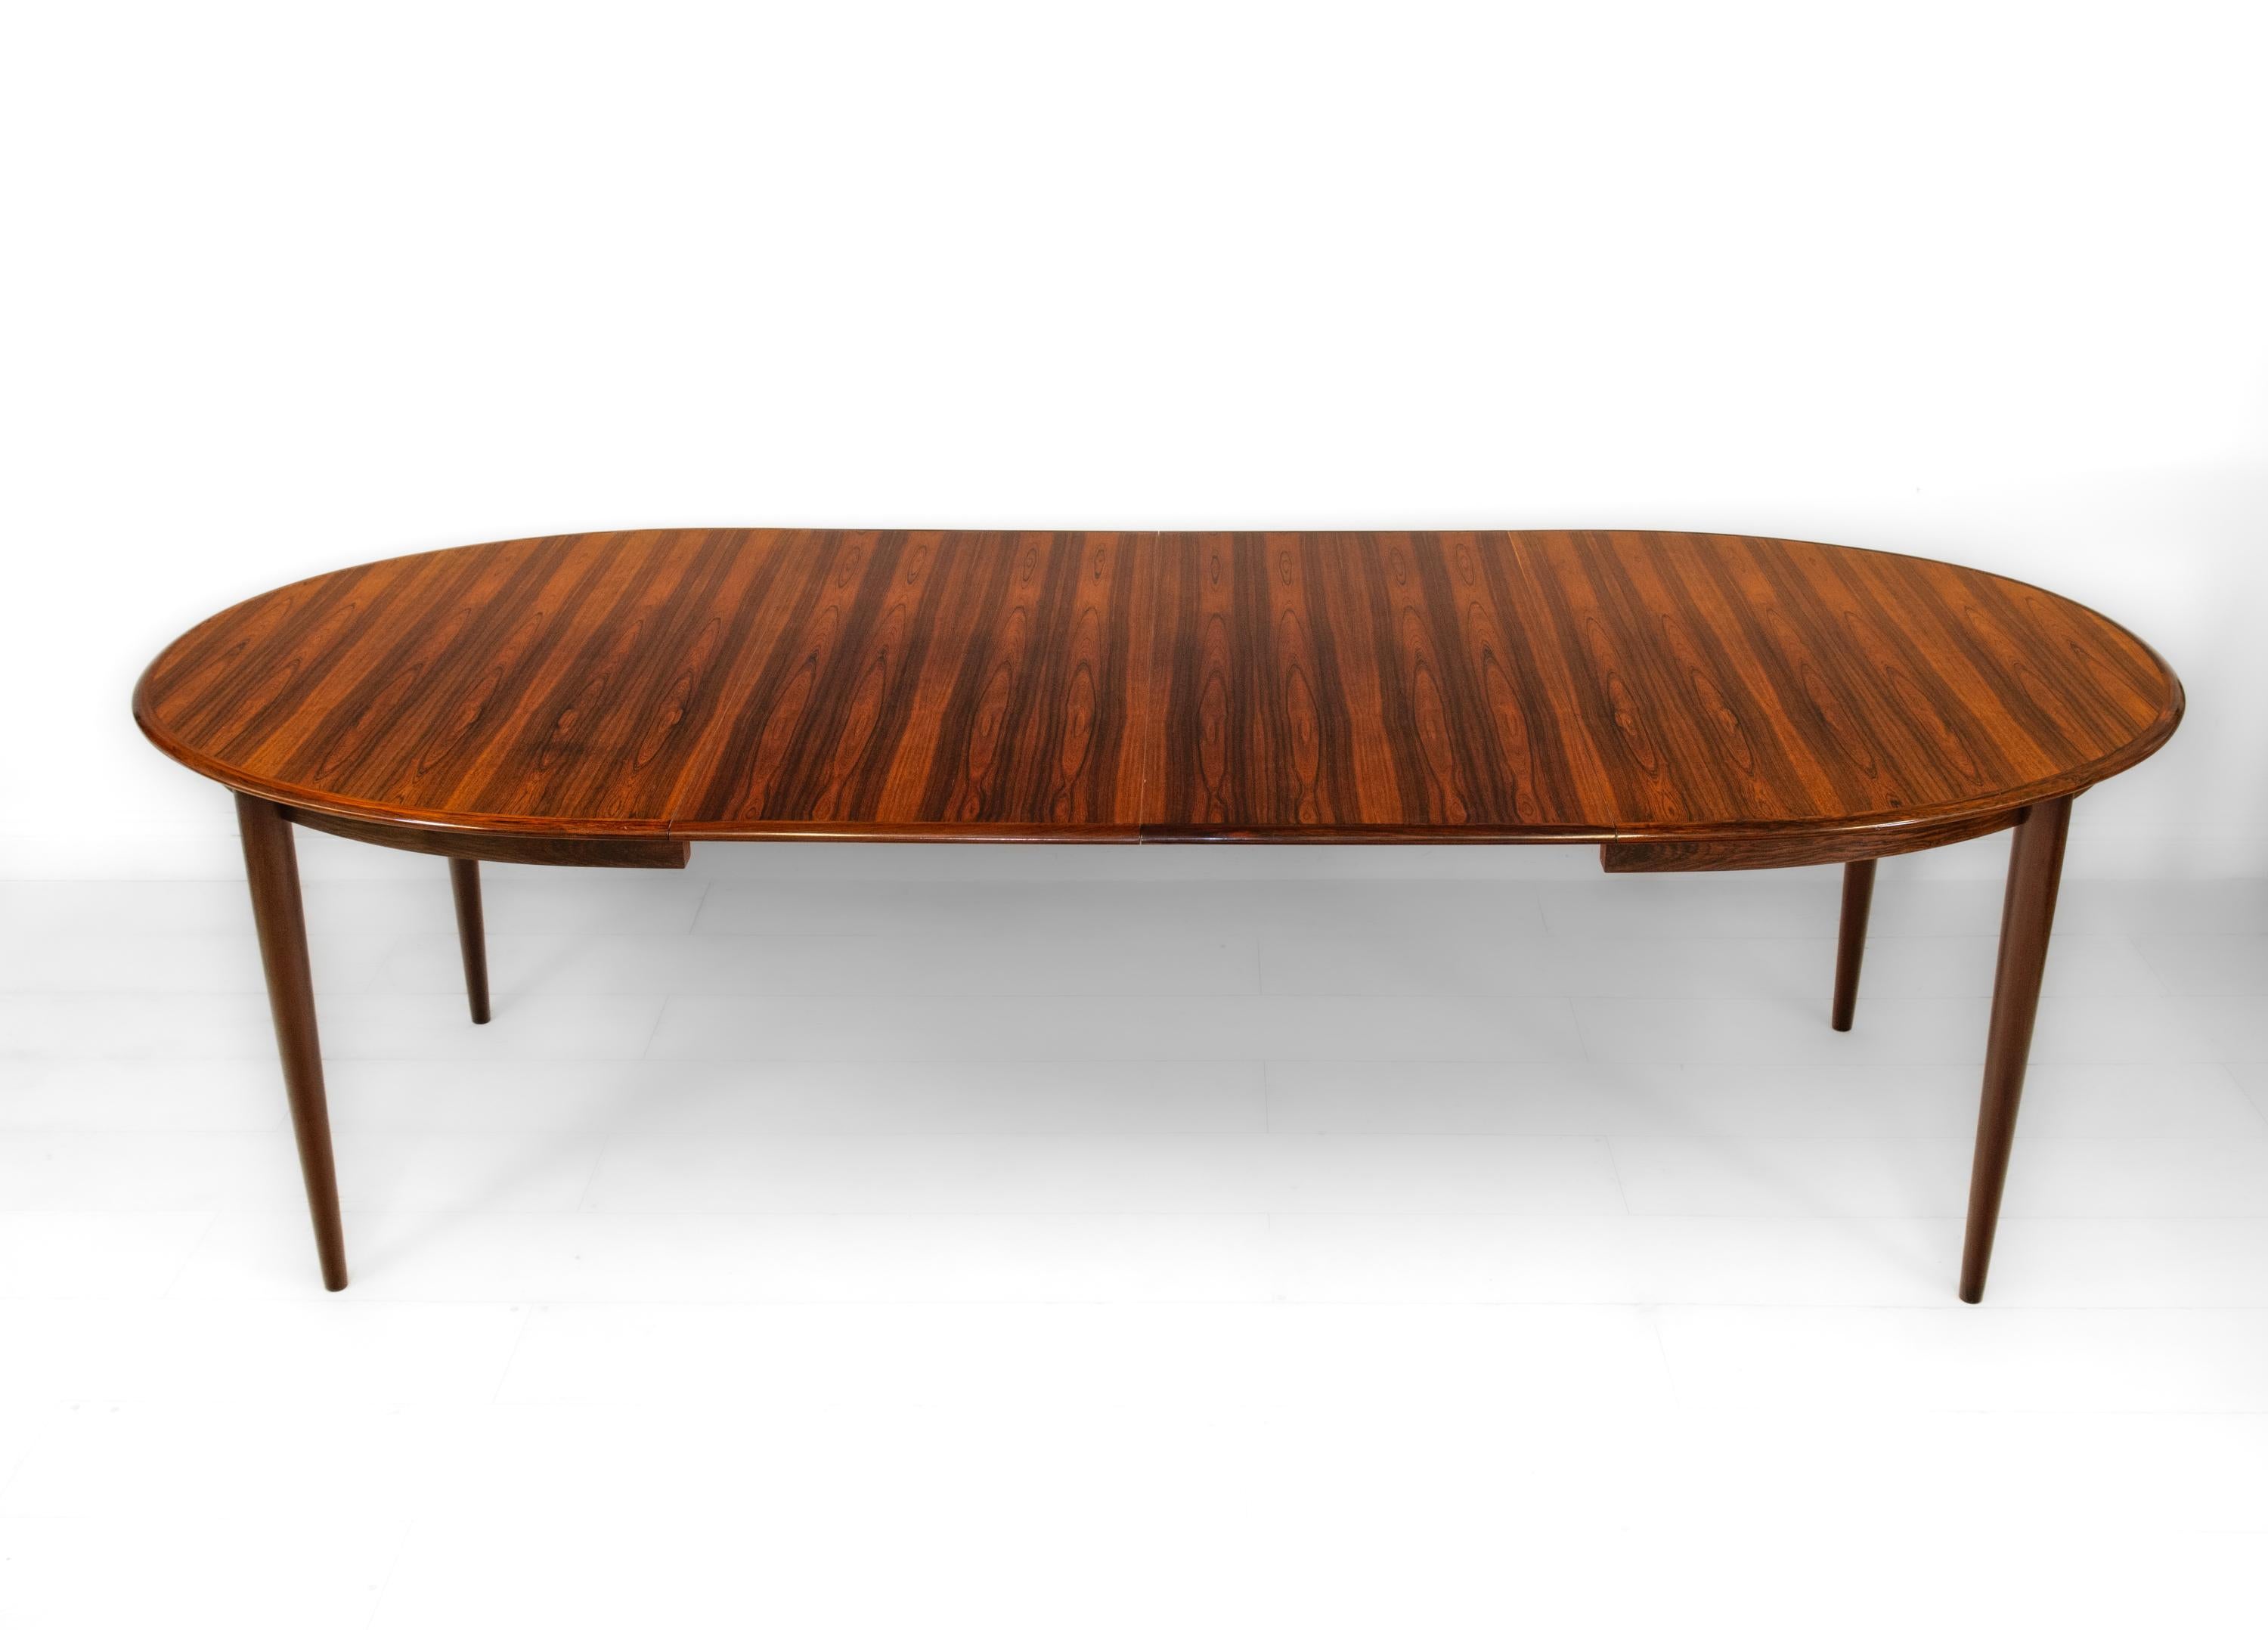 Danish Rosewood Extending Dining Table By Skovmand & Andersen 1960s In Good Condition For Sale In Norwich, GB